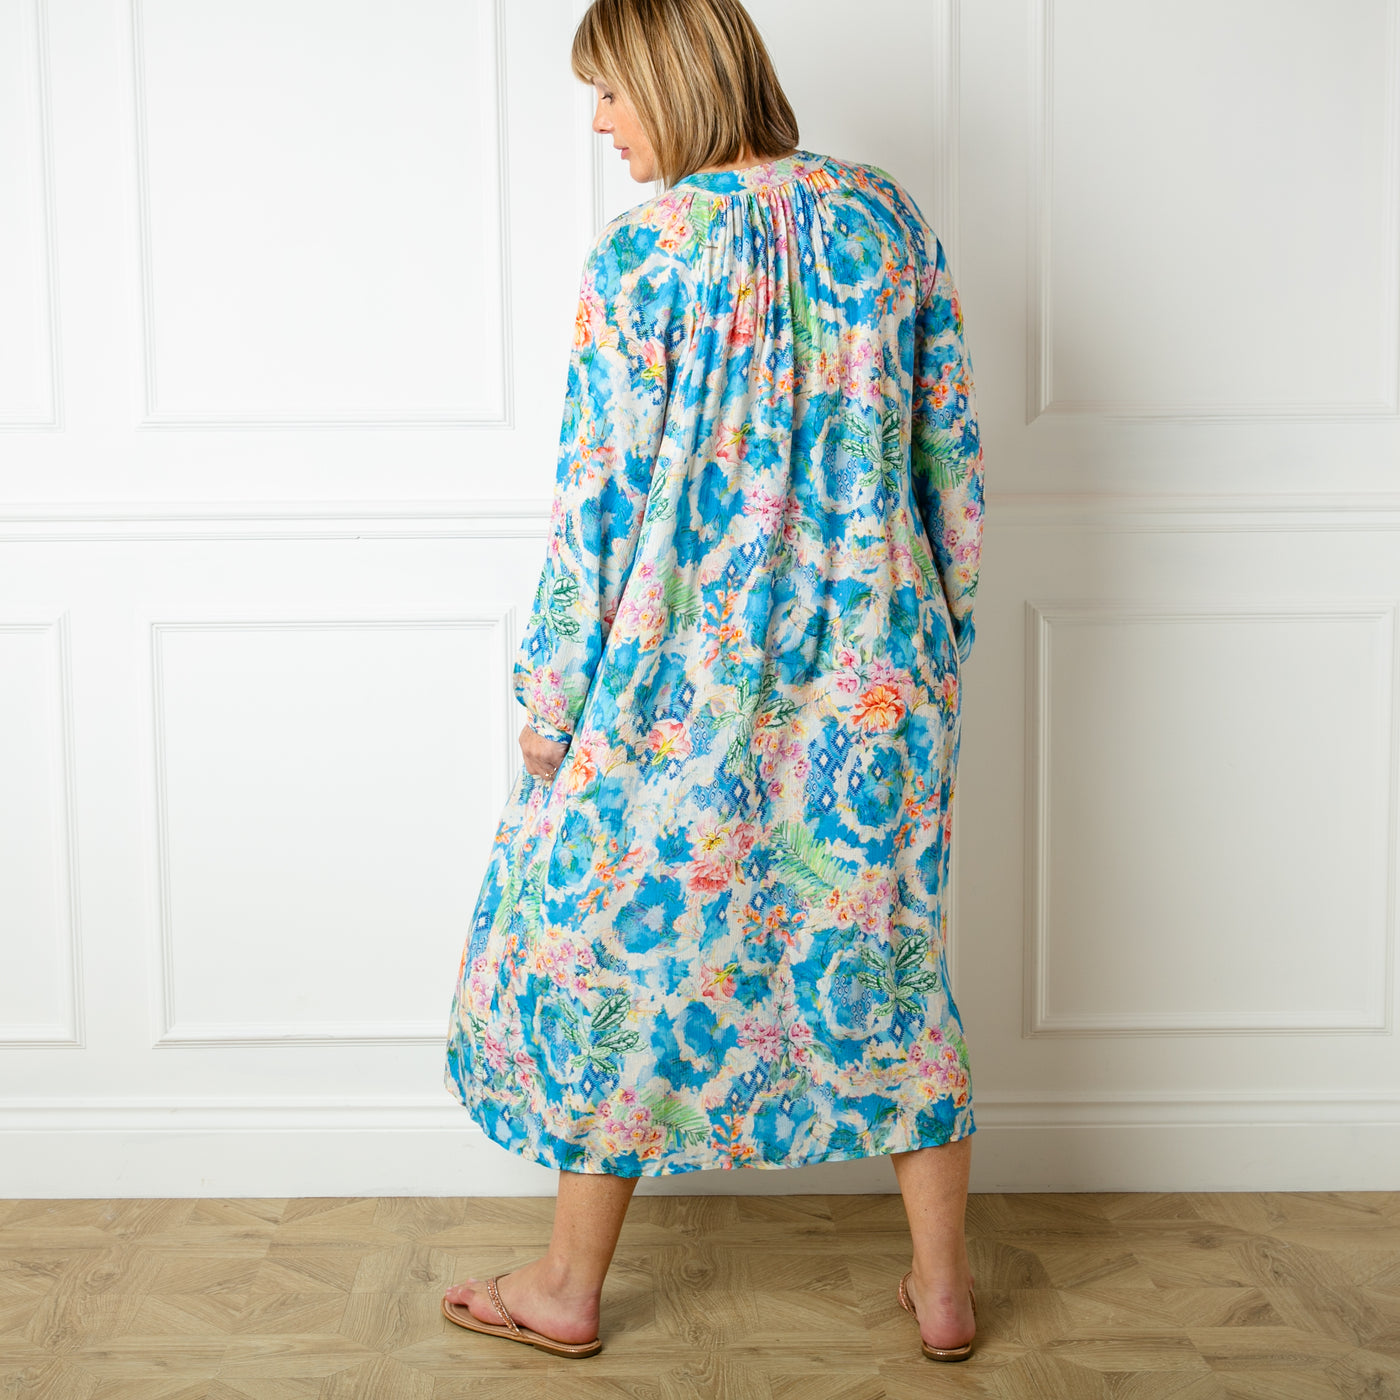 The blue Wild Garden Maxi Dress made from a lightweight viscose material in a beautiful detailed floral print pattern